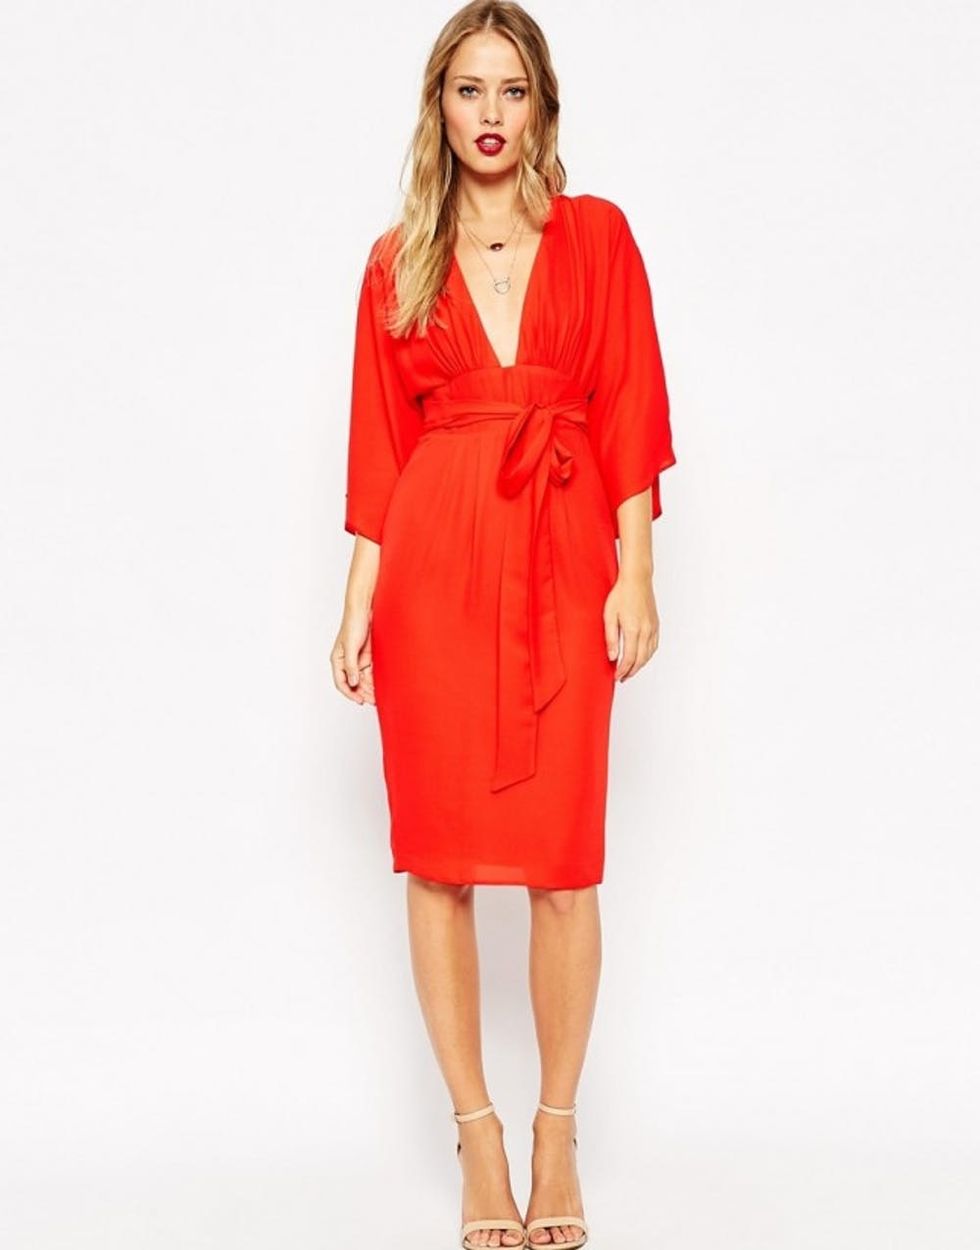 20 Red Dresses for Valentine’s Day That Will Straight Up Slay - Brit + Co